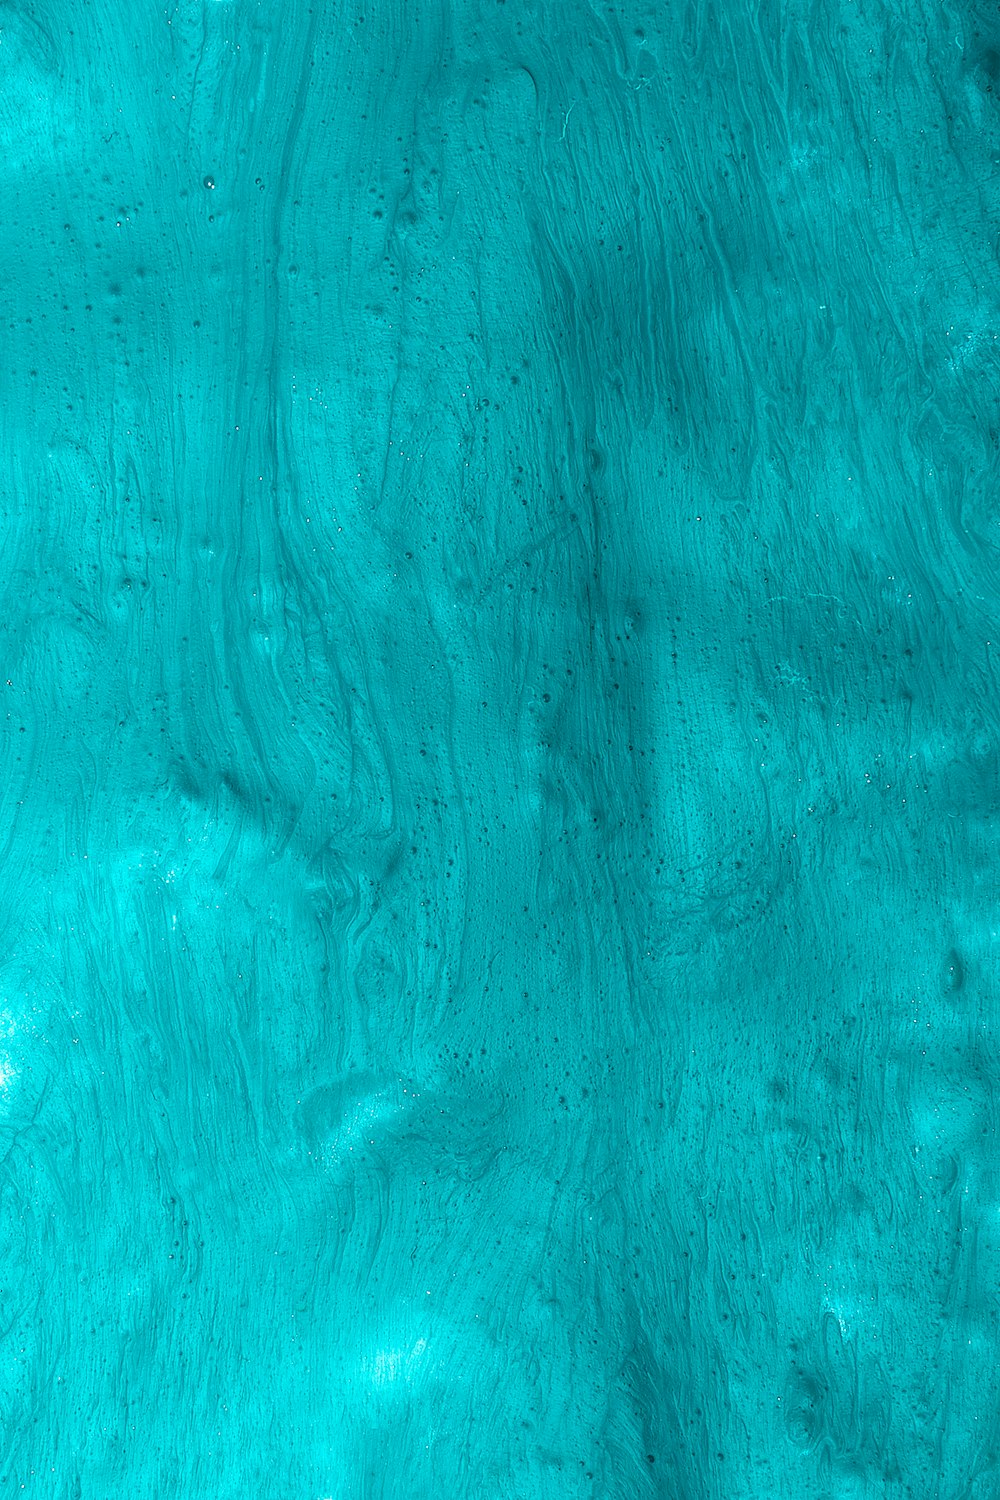 a close up view of a blue water surface